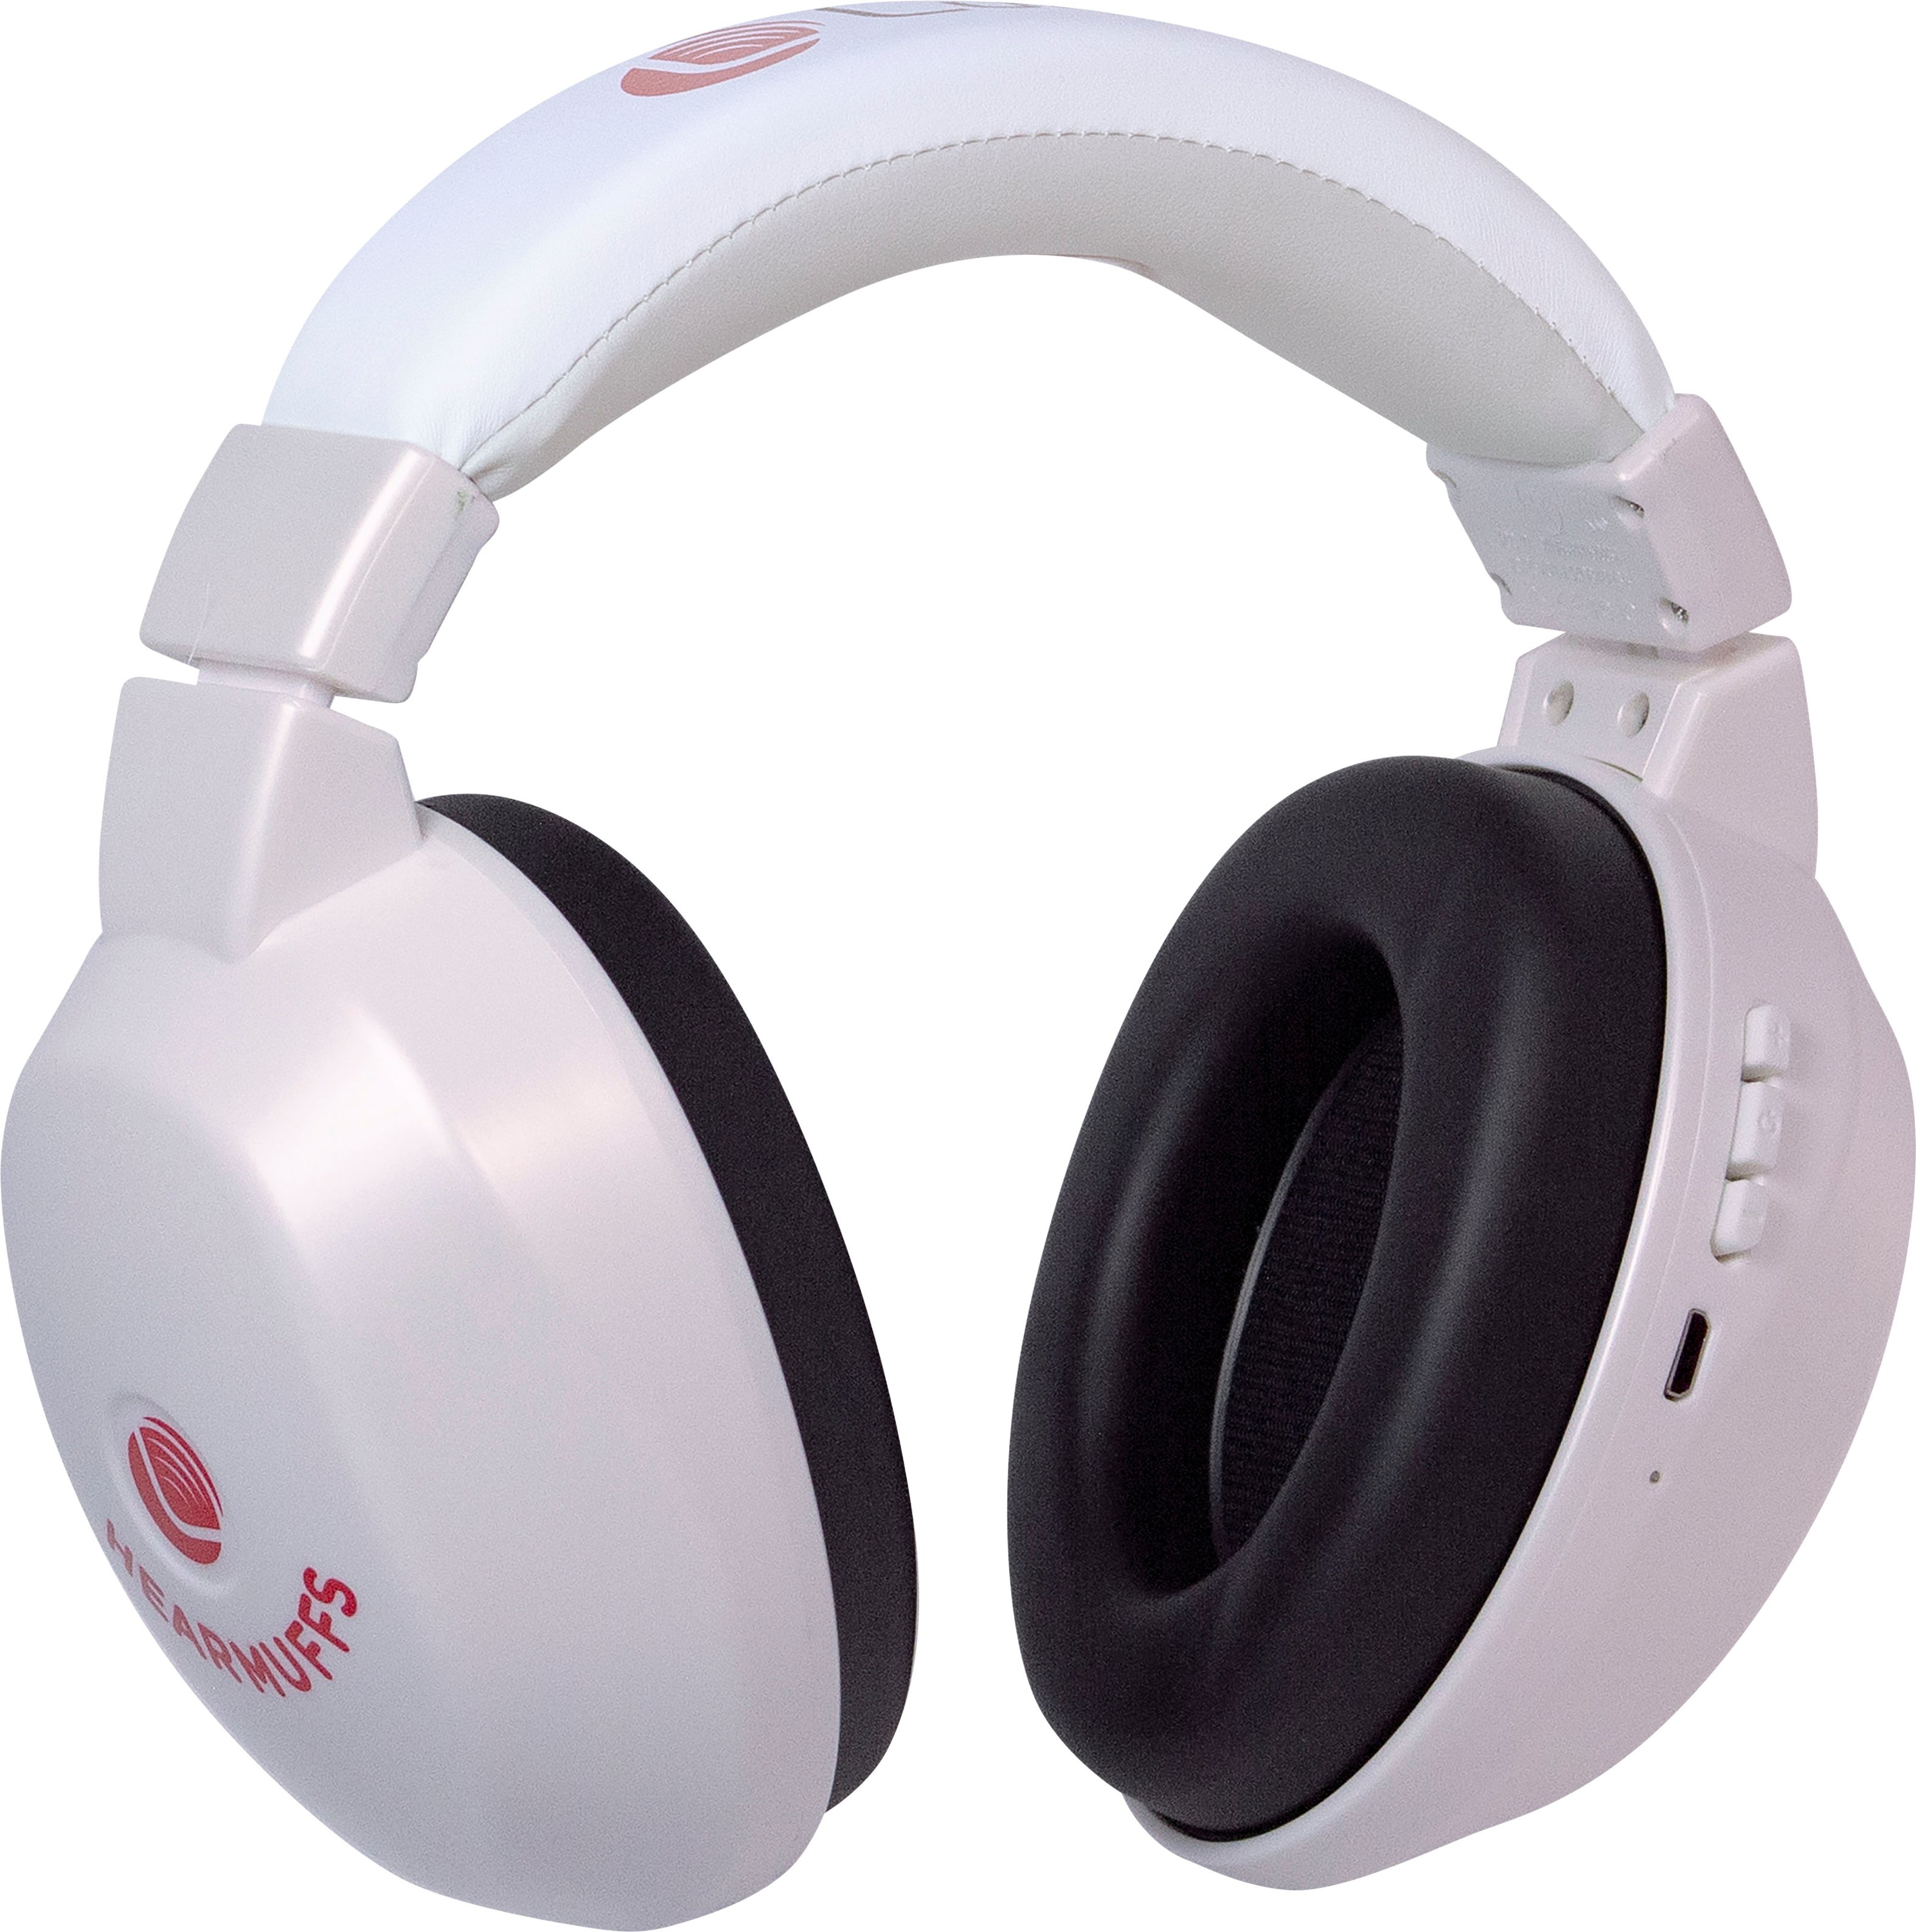 Angle View: Lucid Hearing - Bluetooth HearMuffs for Children - Hearing Protection Ear Muffs Ideal for Kids 5-10 Years Old - WHITE